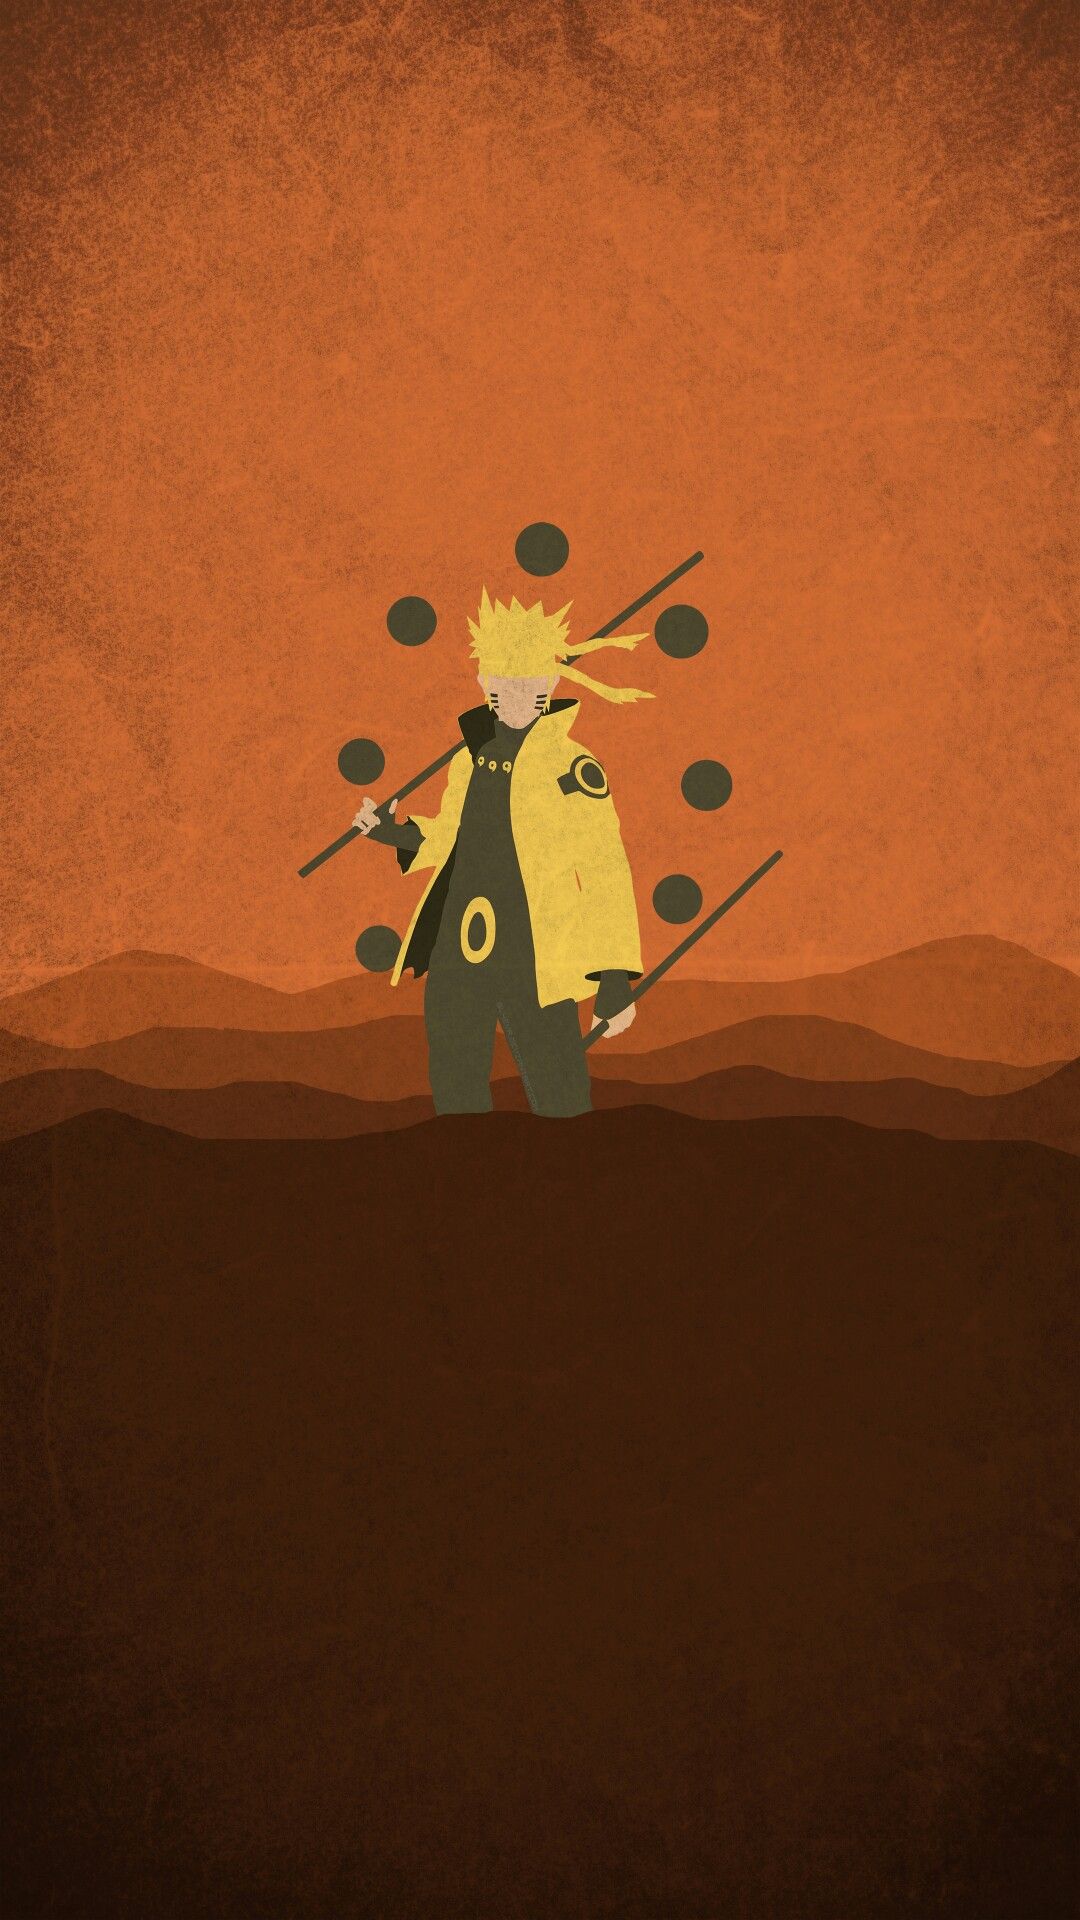 I do not know the artist who created these minimalist wallpaper for the iPhone, but if someone could please make a 'Baryon Mode Naruto that would be amazing